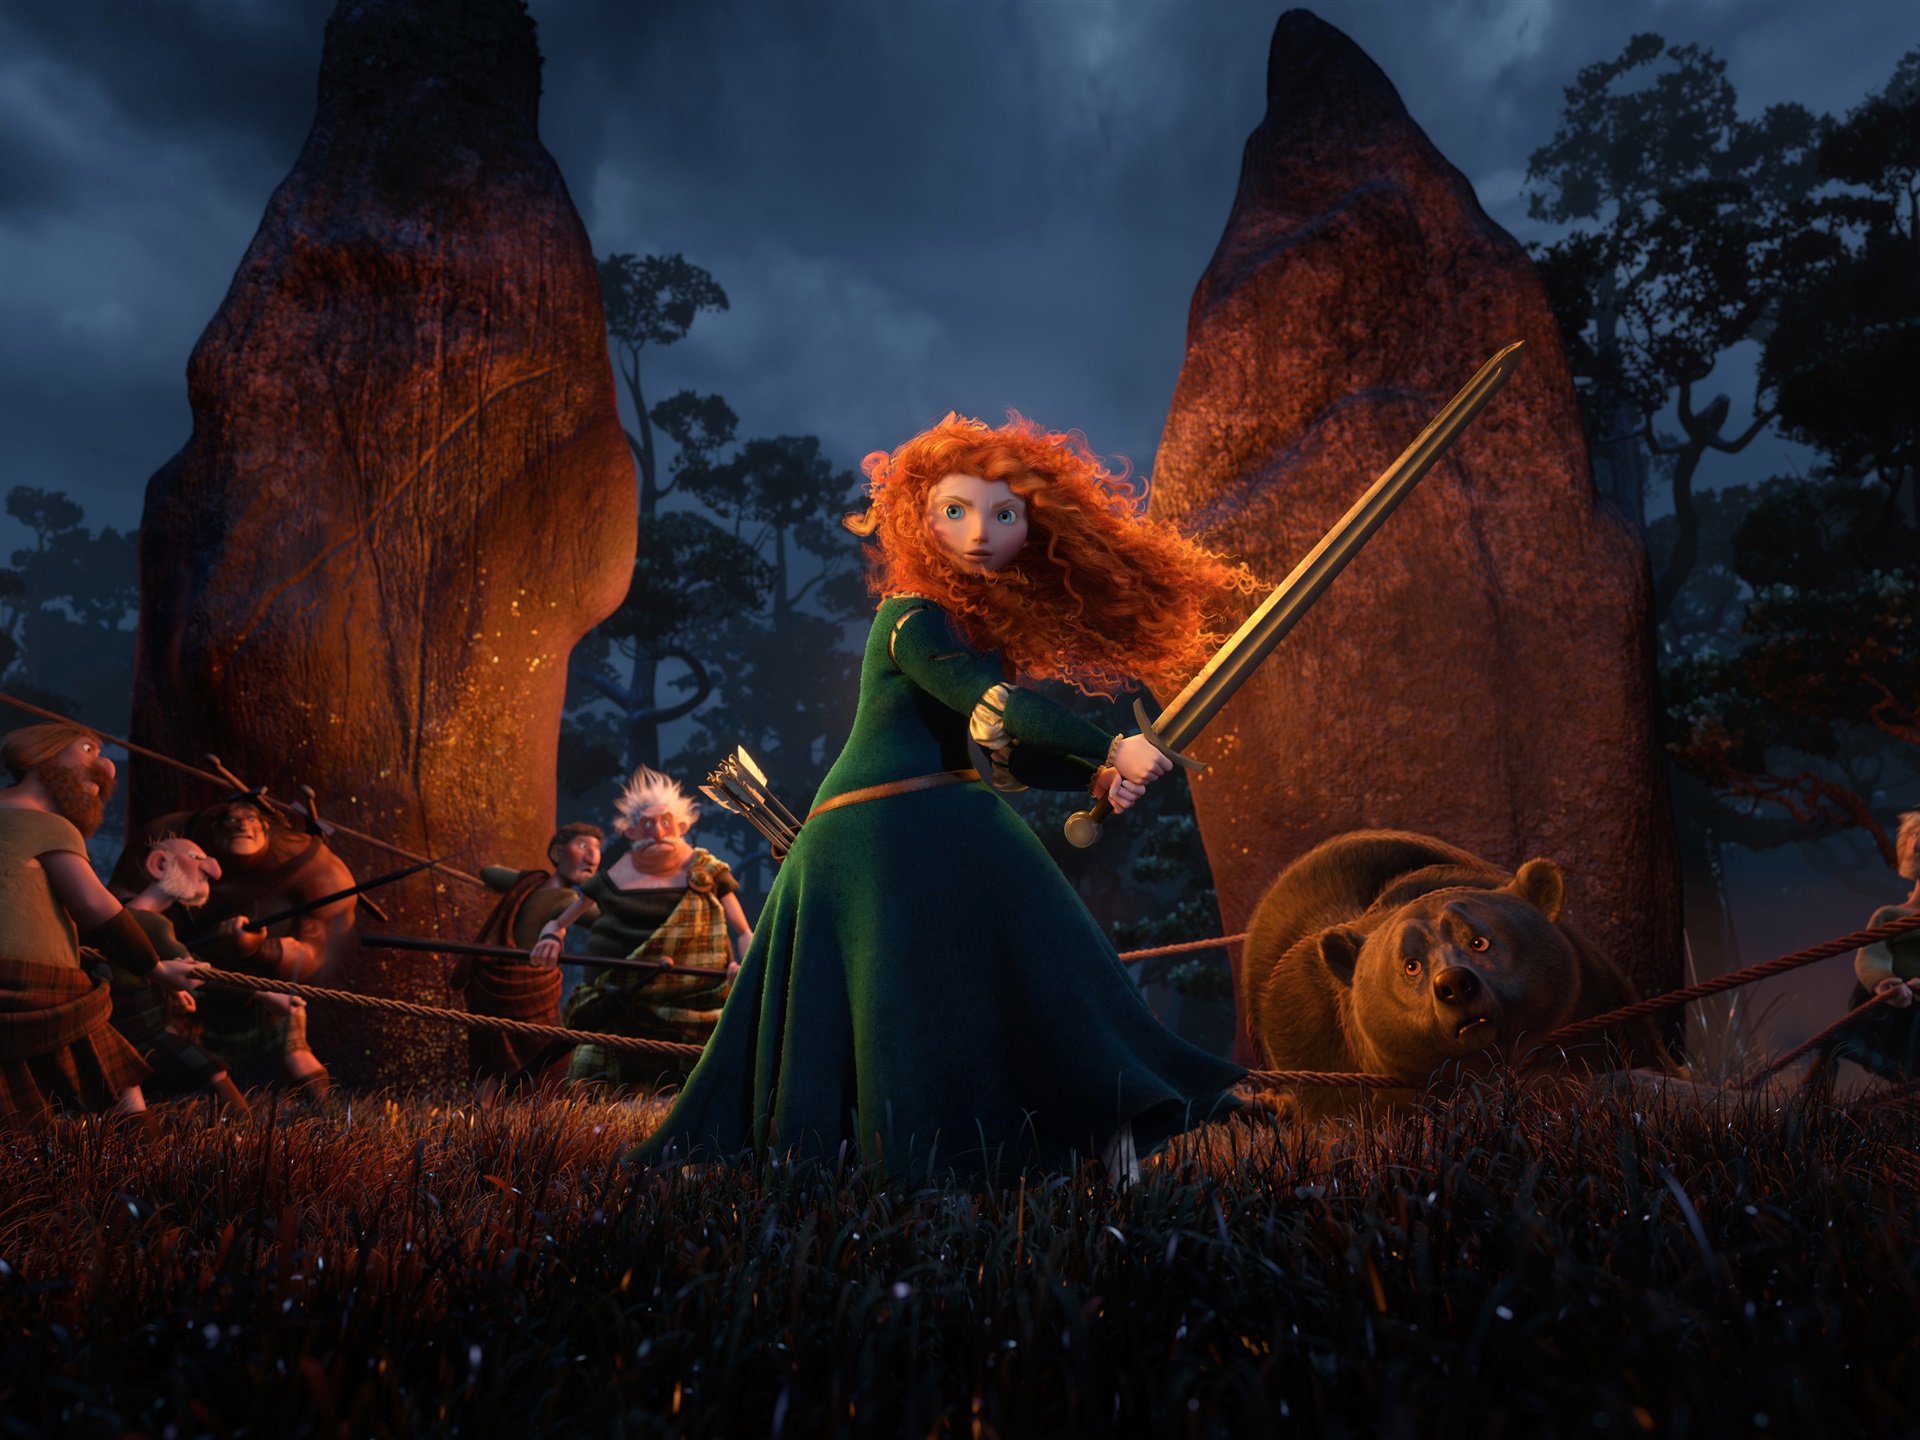 Disney Brave Images Wallpapers